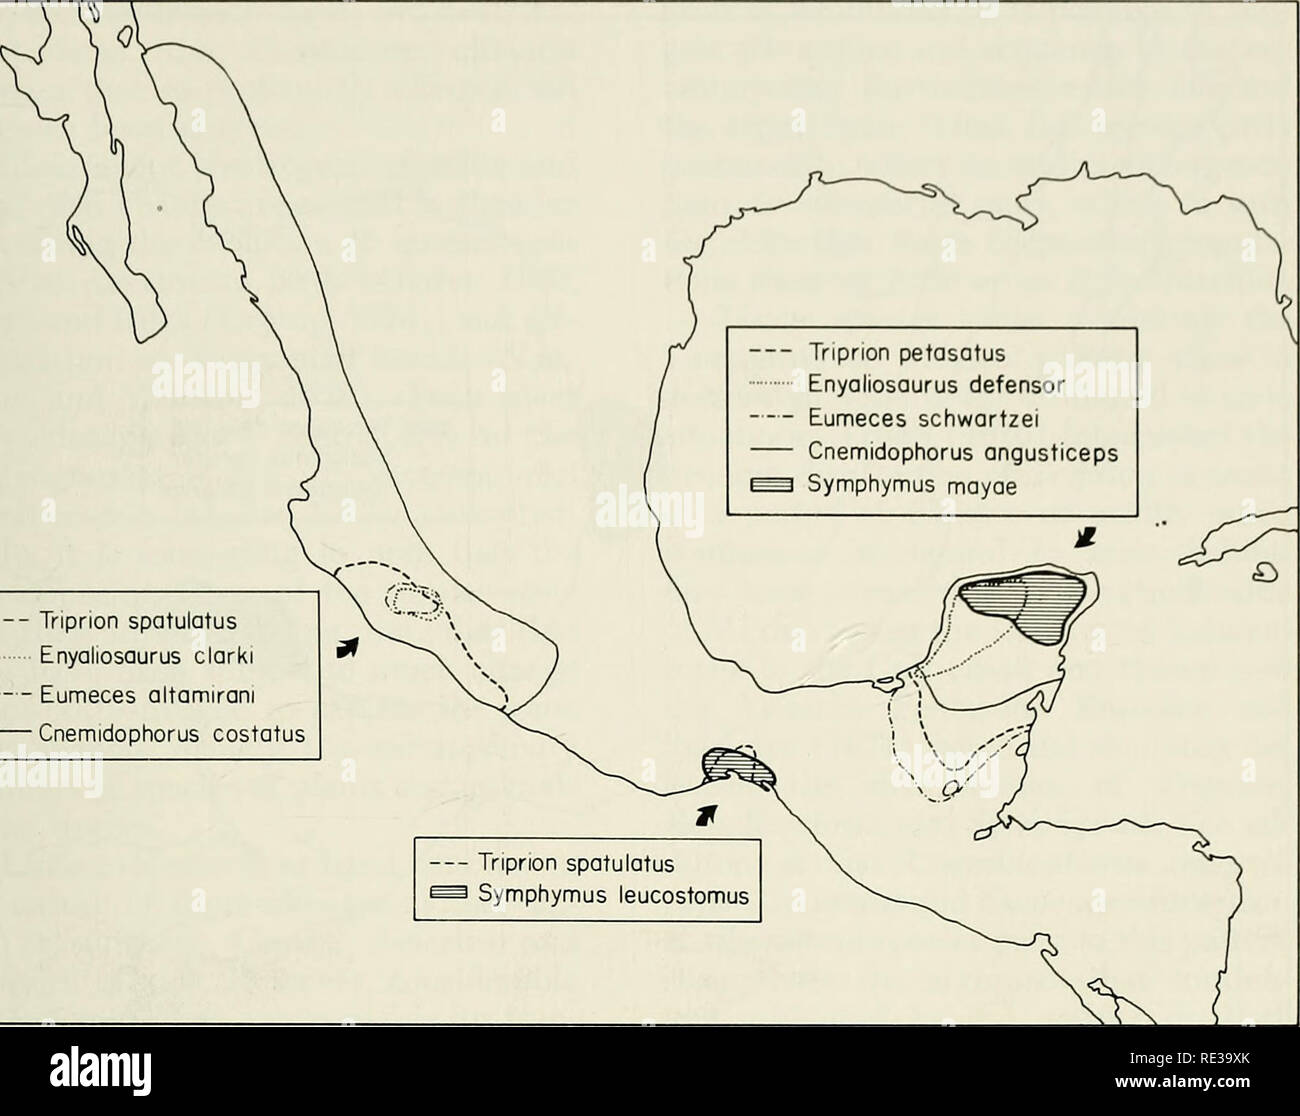 . An ecogeographic analysis of the herpetofauna of the Yucatan Peninsula. Amphibians; Amphibians; Reptiles; Reptiles. YUCATAN HERPETOFAUNA 35. Triprion spatulatus Enyaliosaurus clarki Eumeces altamirani Cnemidophorus costatus Fig. 21.—The Yucatan-West Mexico pattern of distribution. Extra-peninsular distributions are rough approximations. limits of this mesophilic genus. Thus, two mesic-adapted species are confined to the north end of the peninsula, but have their closest relatives in wetter areas to the south. An additional spe- cies, presumably mesophilic, existed at the north end of the pen Stock Photo